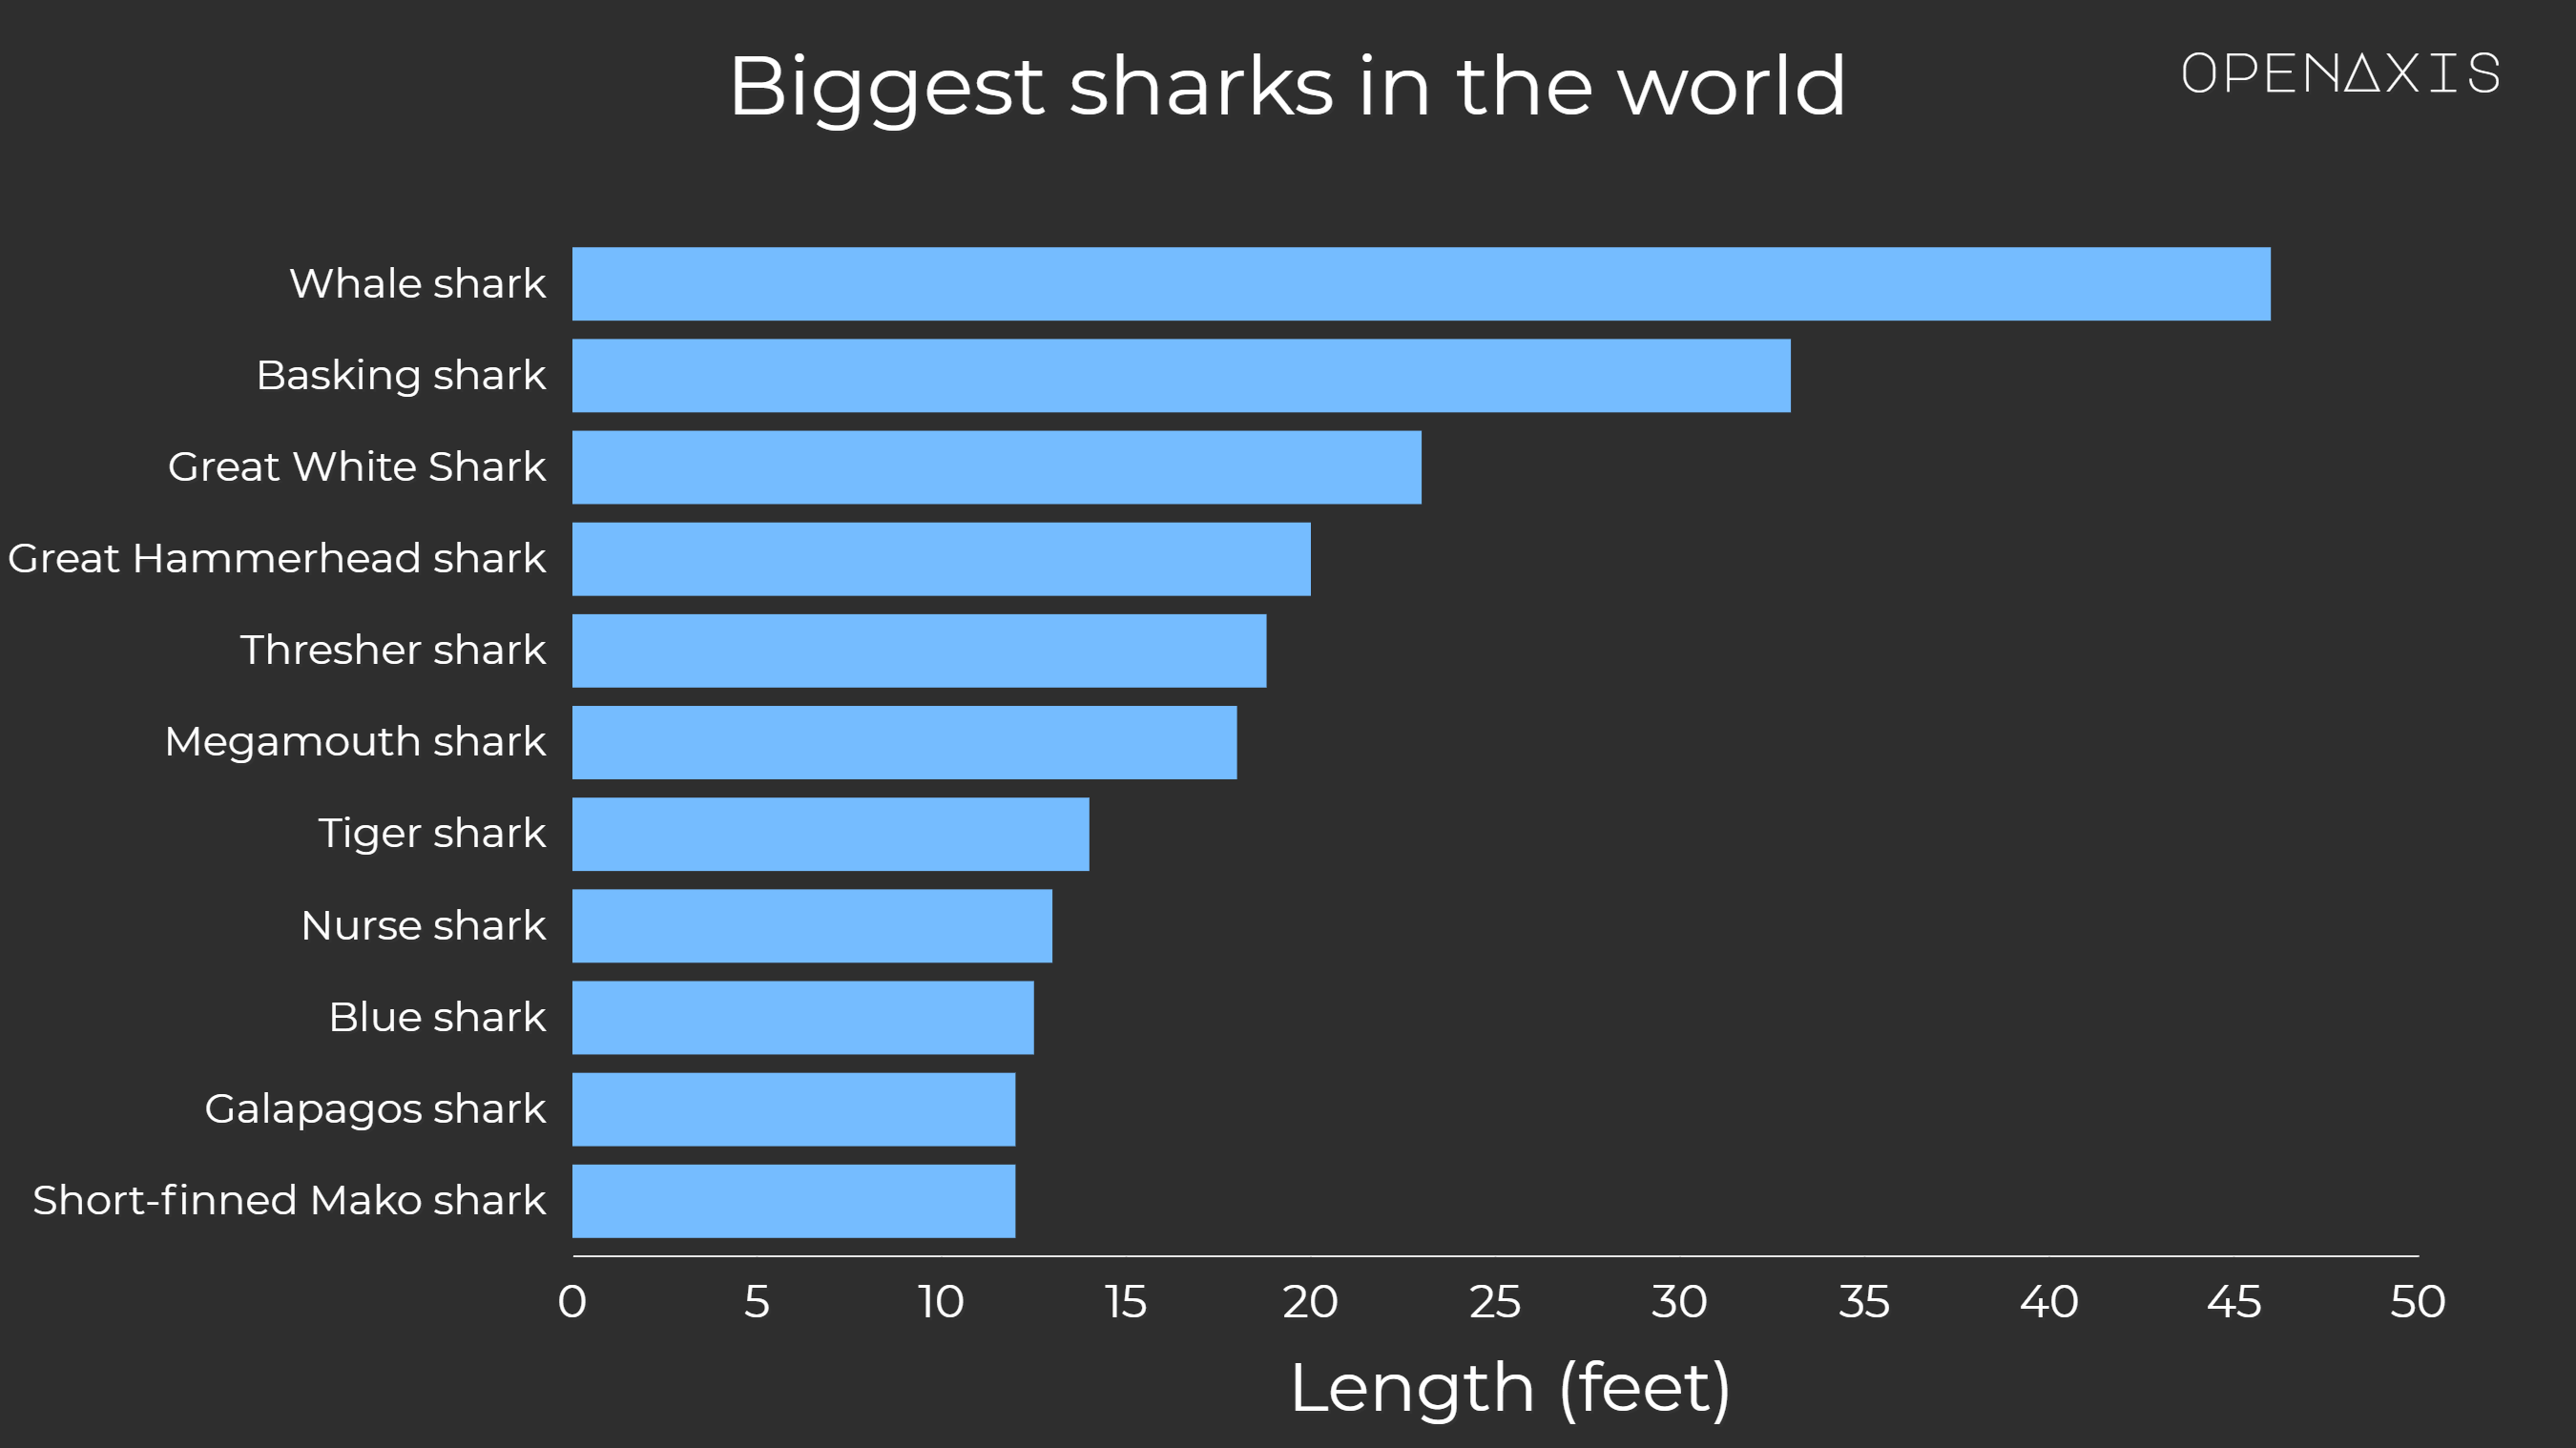 <p>Would it surprise you to know that on the list of the 500+ shark species by size, well over three-quarters are no bigger than the average adult man and over 100 are less than 60cm long? From small and harmless to huge and scary, there’s certainly no one-size-fits-all where sharks are concerned.</p><p><br /></p><p><span data-index="0" data-denotation-char data-id="0" data-value="&lt;a href=&quot;/search?q=%23sharkweek&quot; target=_self&gt;#sharkweek" data-link="/search?q=%23sharkweek">﻿<span contenteditable="false"><span></span><a href="/search?q=%23sharkweek" target="_self">#sharkweek</a></span>﻿</span> <span data-index="0" data-denotation-char data-id="0" data-value="&lt;a href=&quot;/search?q=%23ocean&quot; target=_self&gt;#ocean" data-link="/search?q=%23ocean">﻿<span contenteditable="false"><span></span><a href="/search?q=%23ocean" target="_self">#ocean</a></span>﻿</span></p><p><br /></p><p>Source: <a href="/data/4001" target="_blank">Discovery, Enchanted Learning</a></p><p><br /></p>